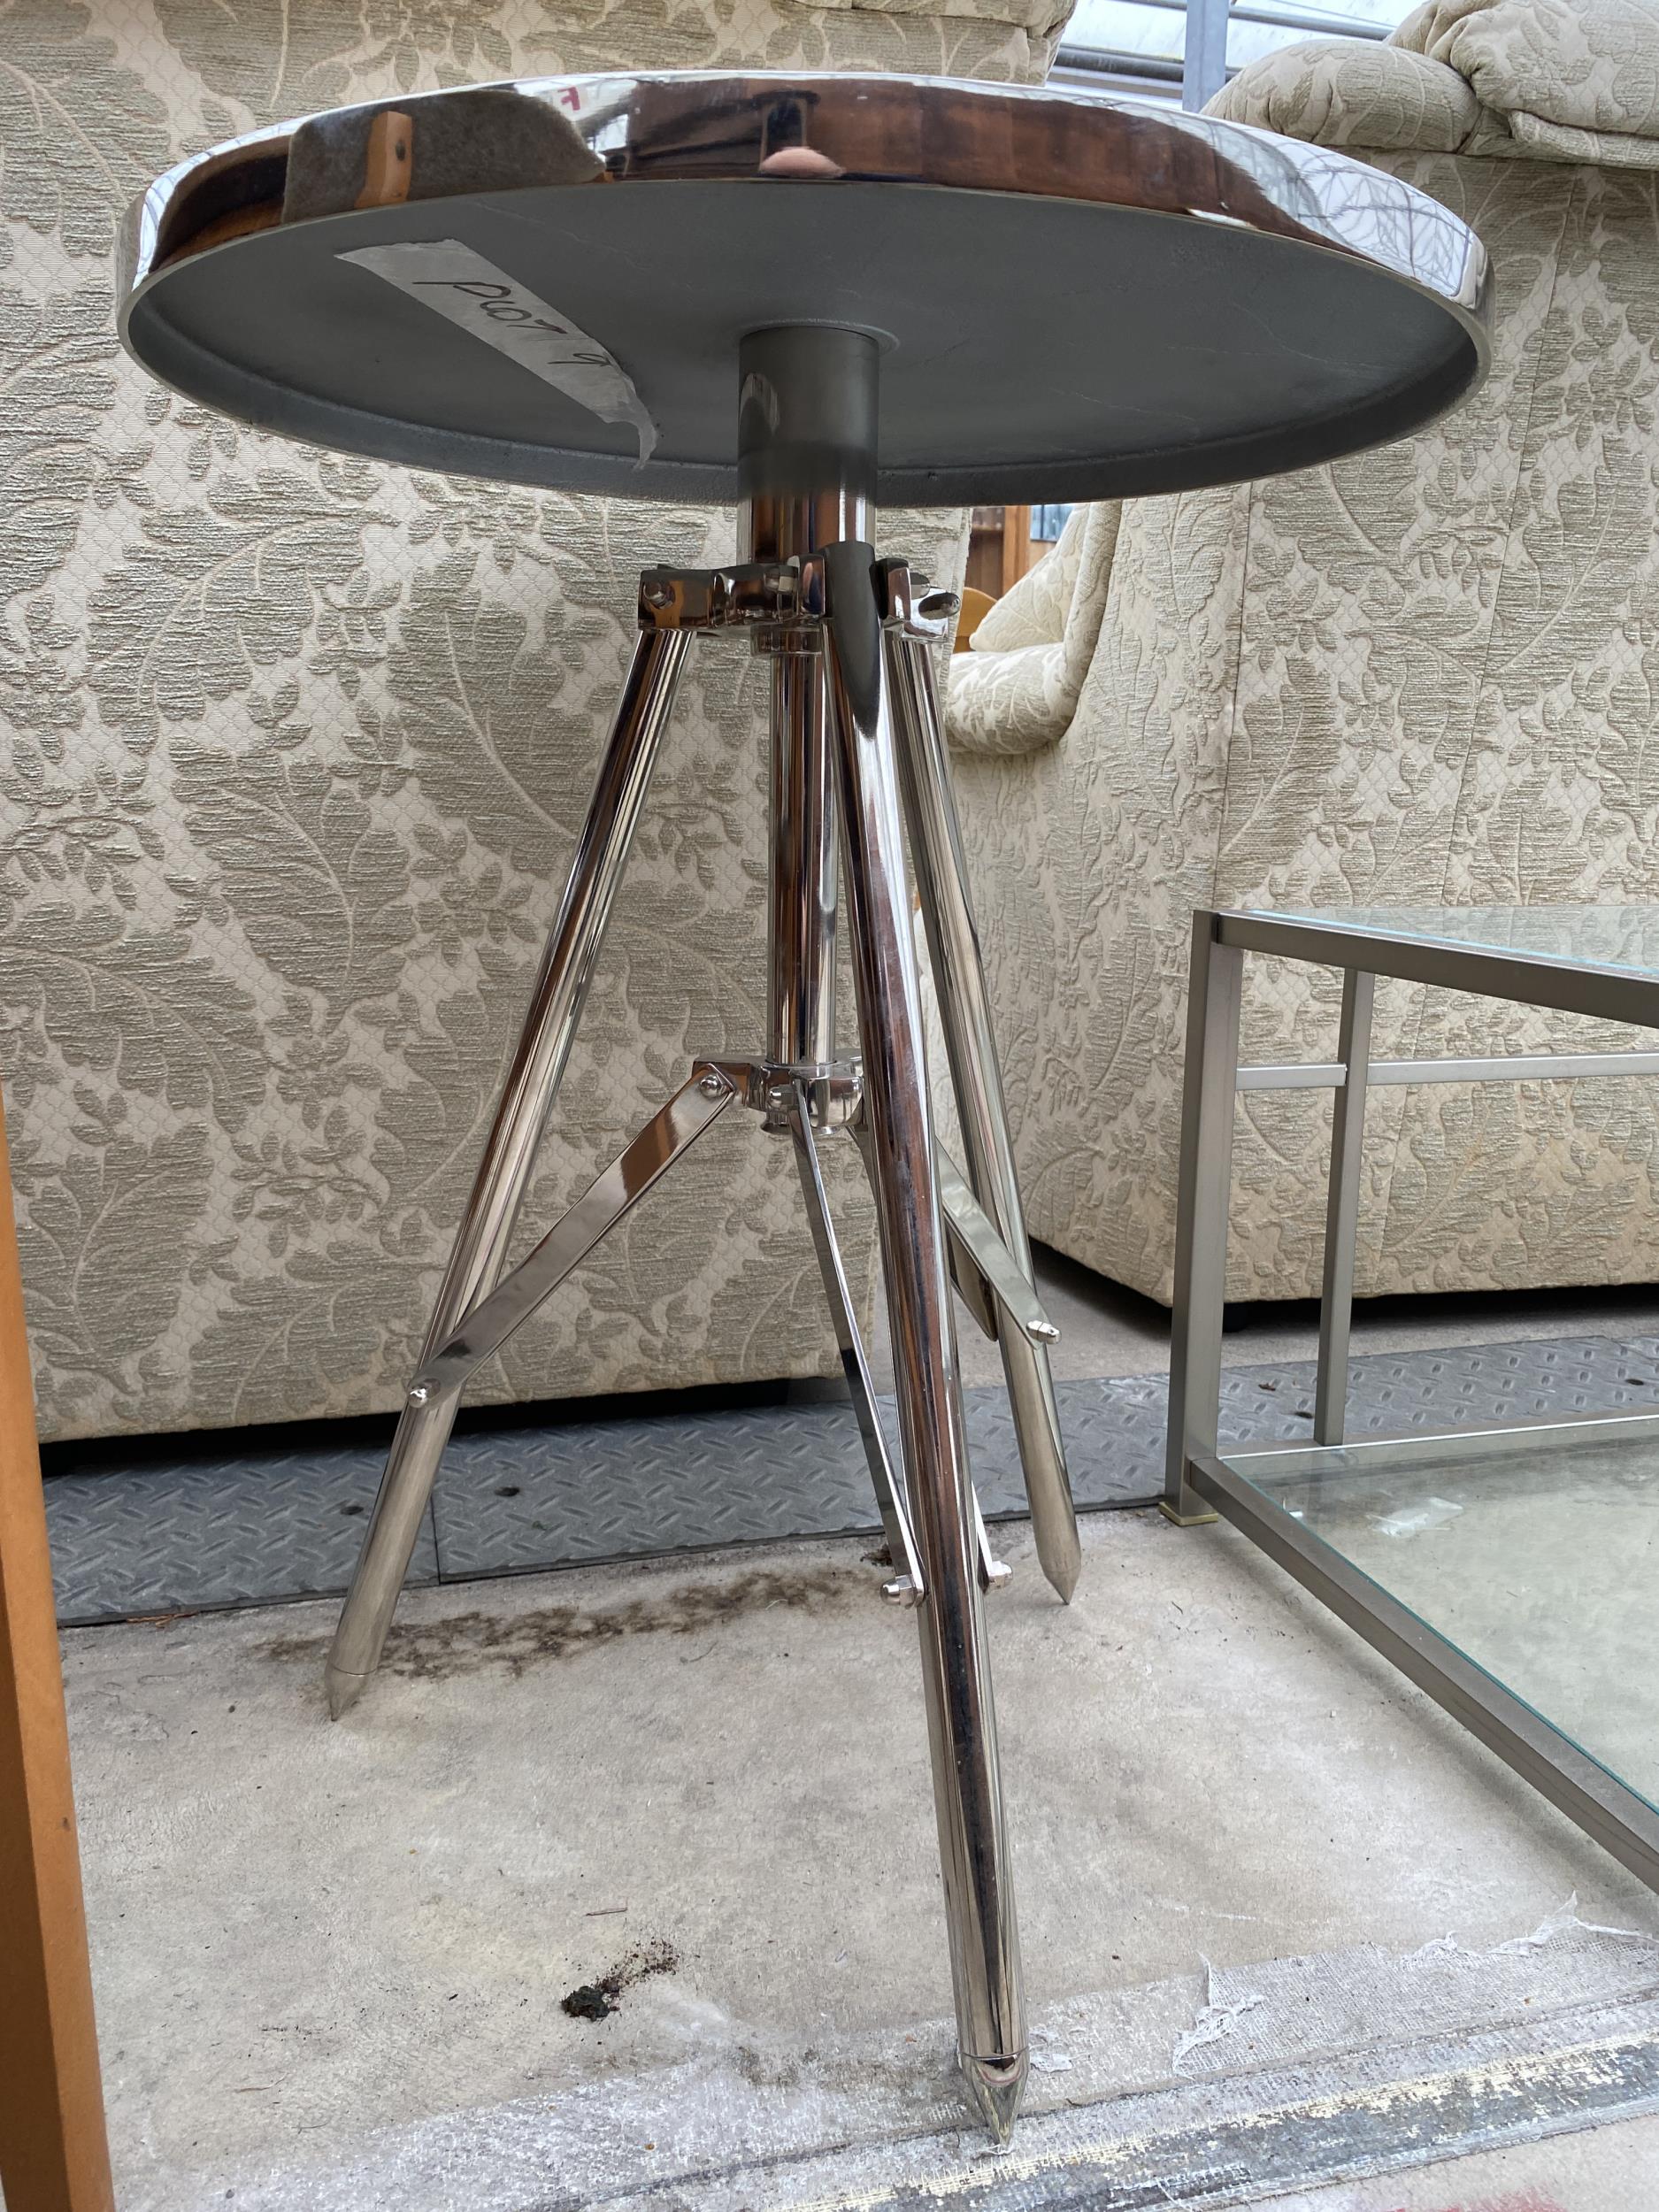 A MODERN POLISHED METALWARE TABLE WITH FOLDING LEGS, 21" DIAMETER - Image 2 of 2